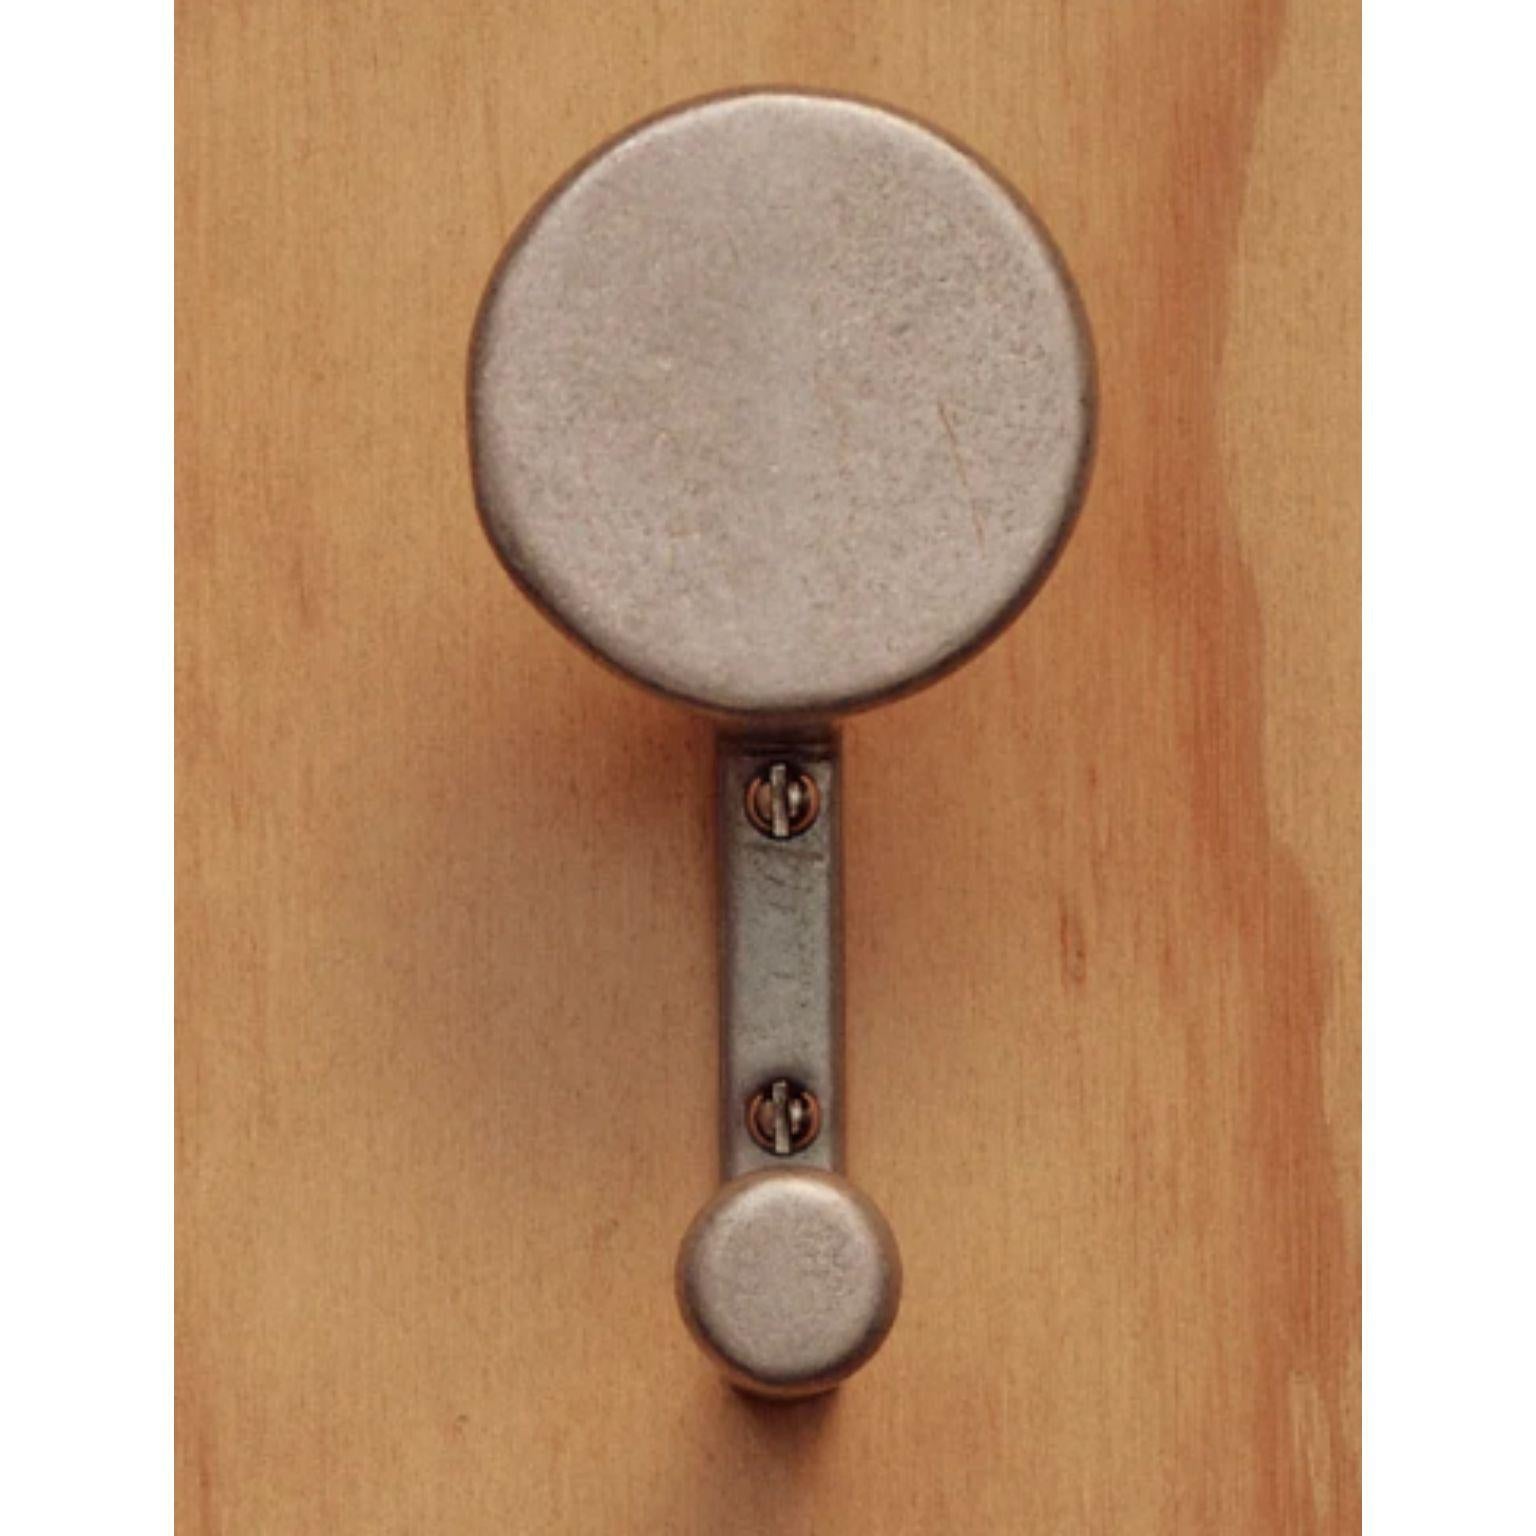 Set of 3 F.ACE Aluminium Wall Hooks by Henry Wilson
Dimensions: W 6 x D 5 x H 10 cm
Materials: Aluminium 

The F.ACE Hook is a riff on our popular compass Hook. It is sand cast in solid Aluminium and features a full disc for the main hanging point.